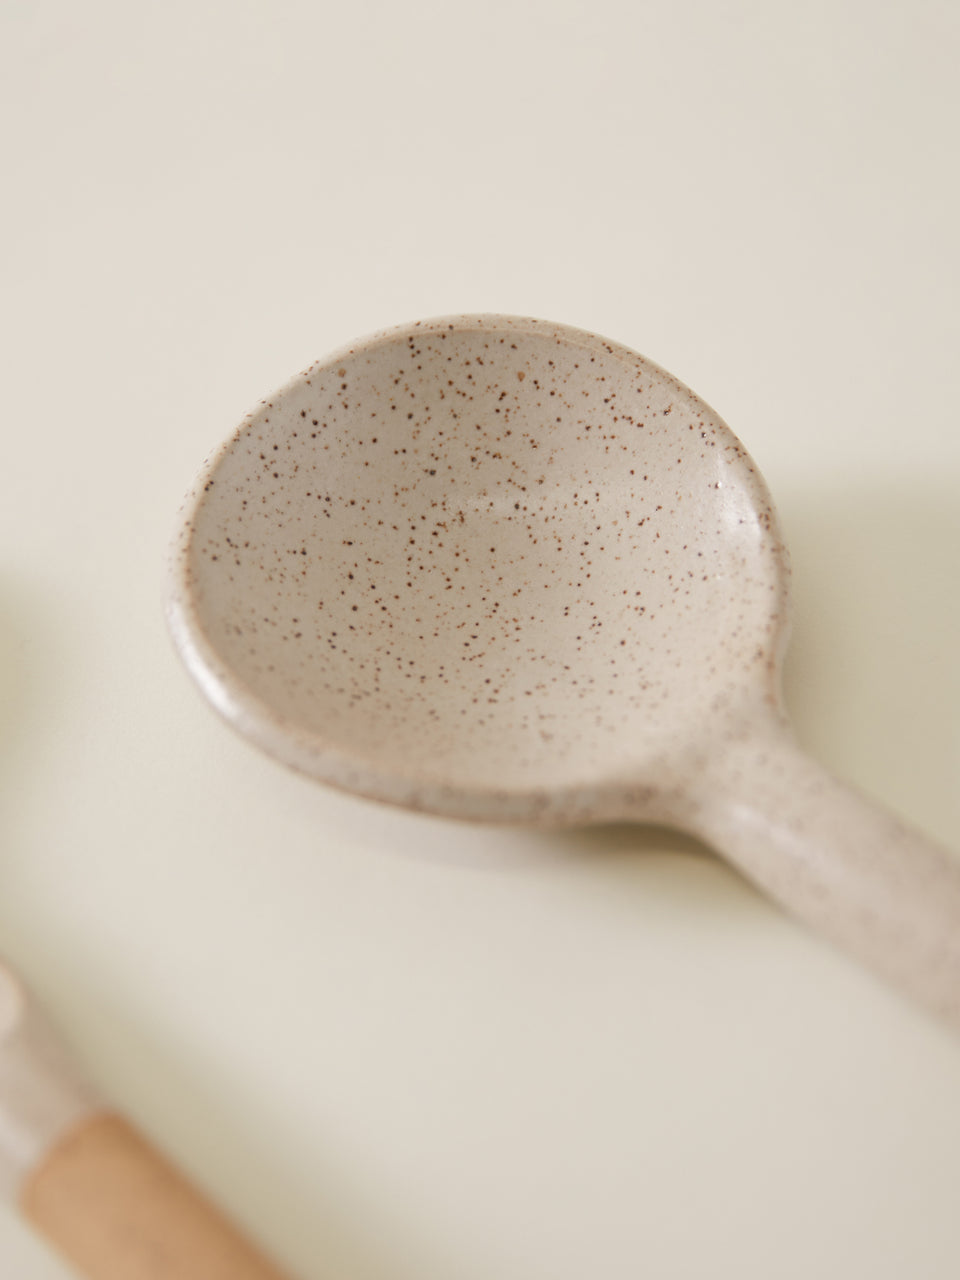 Dash Serving Spoons (1 Pair), Pebble / Speckled